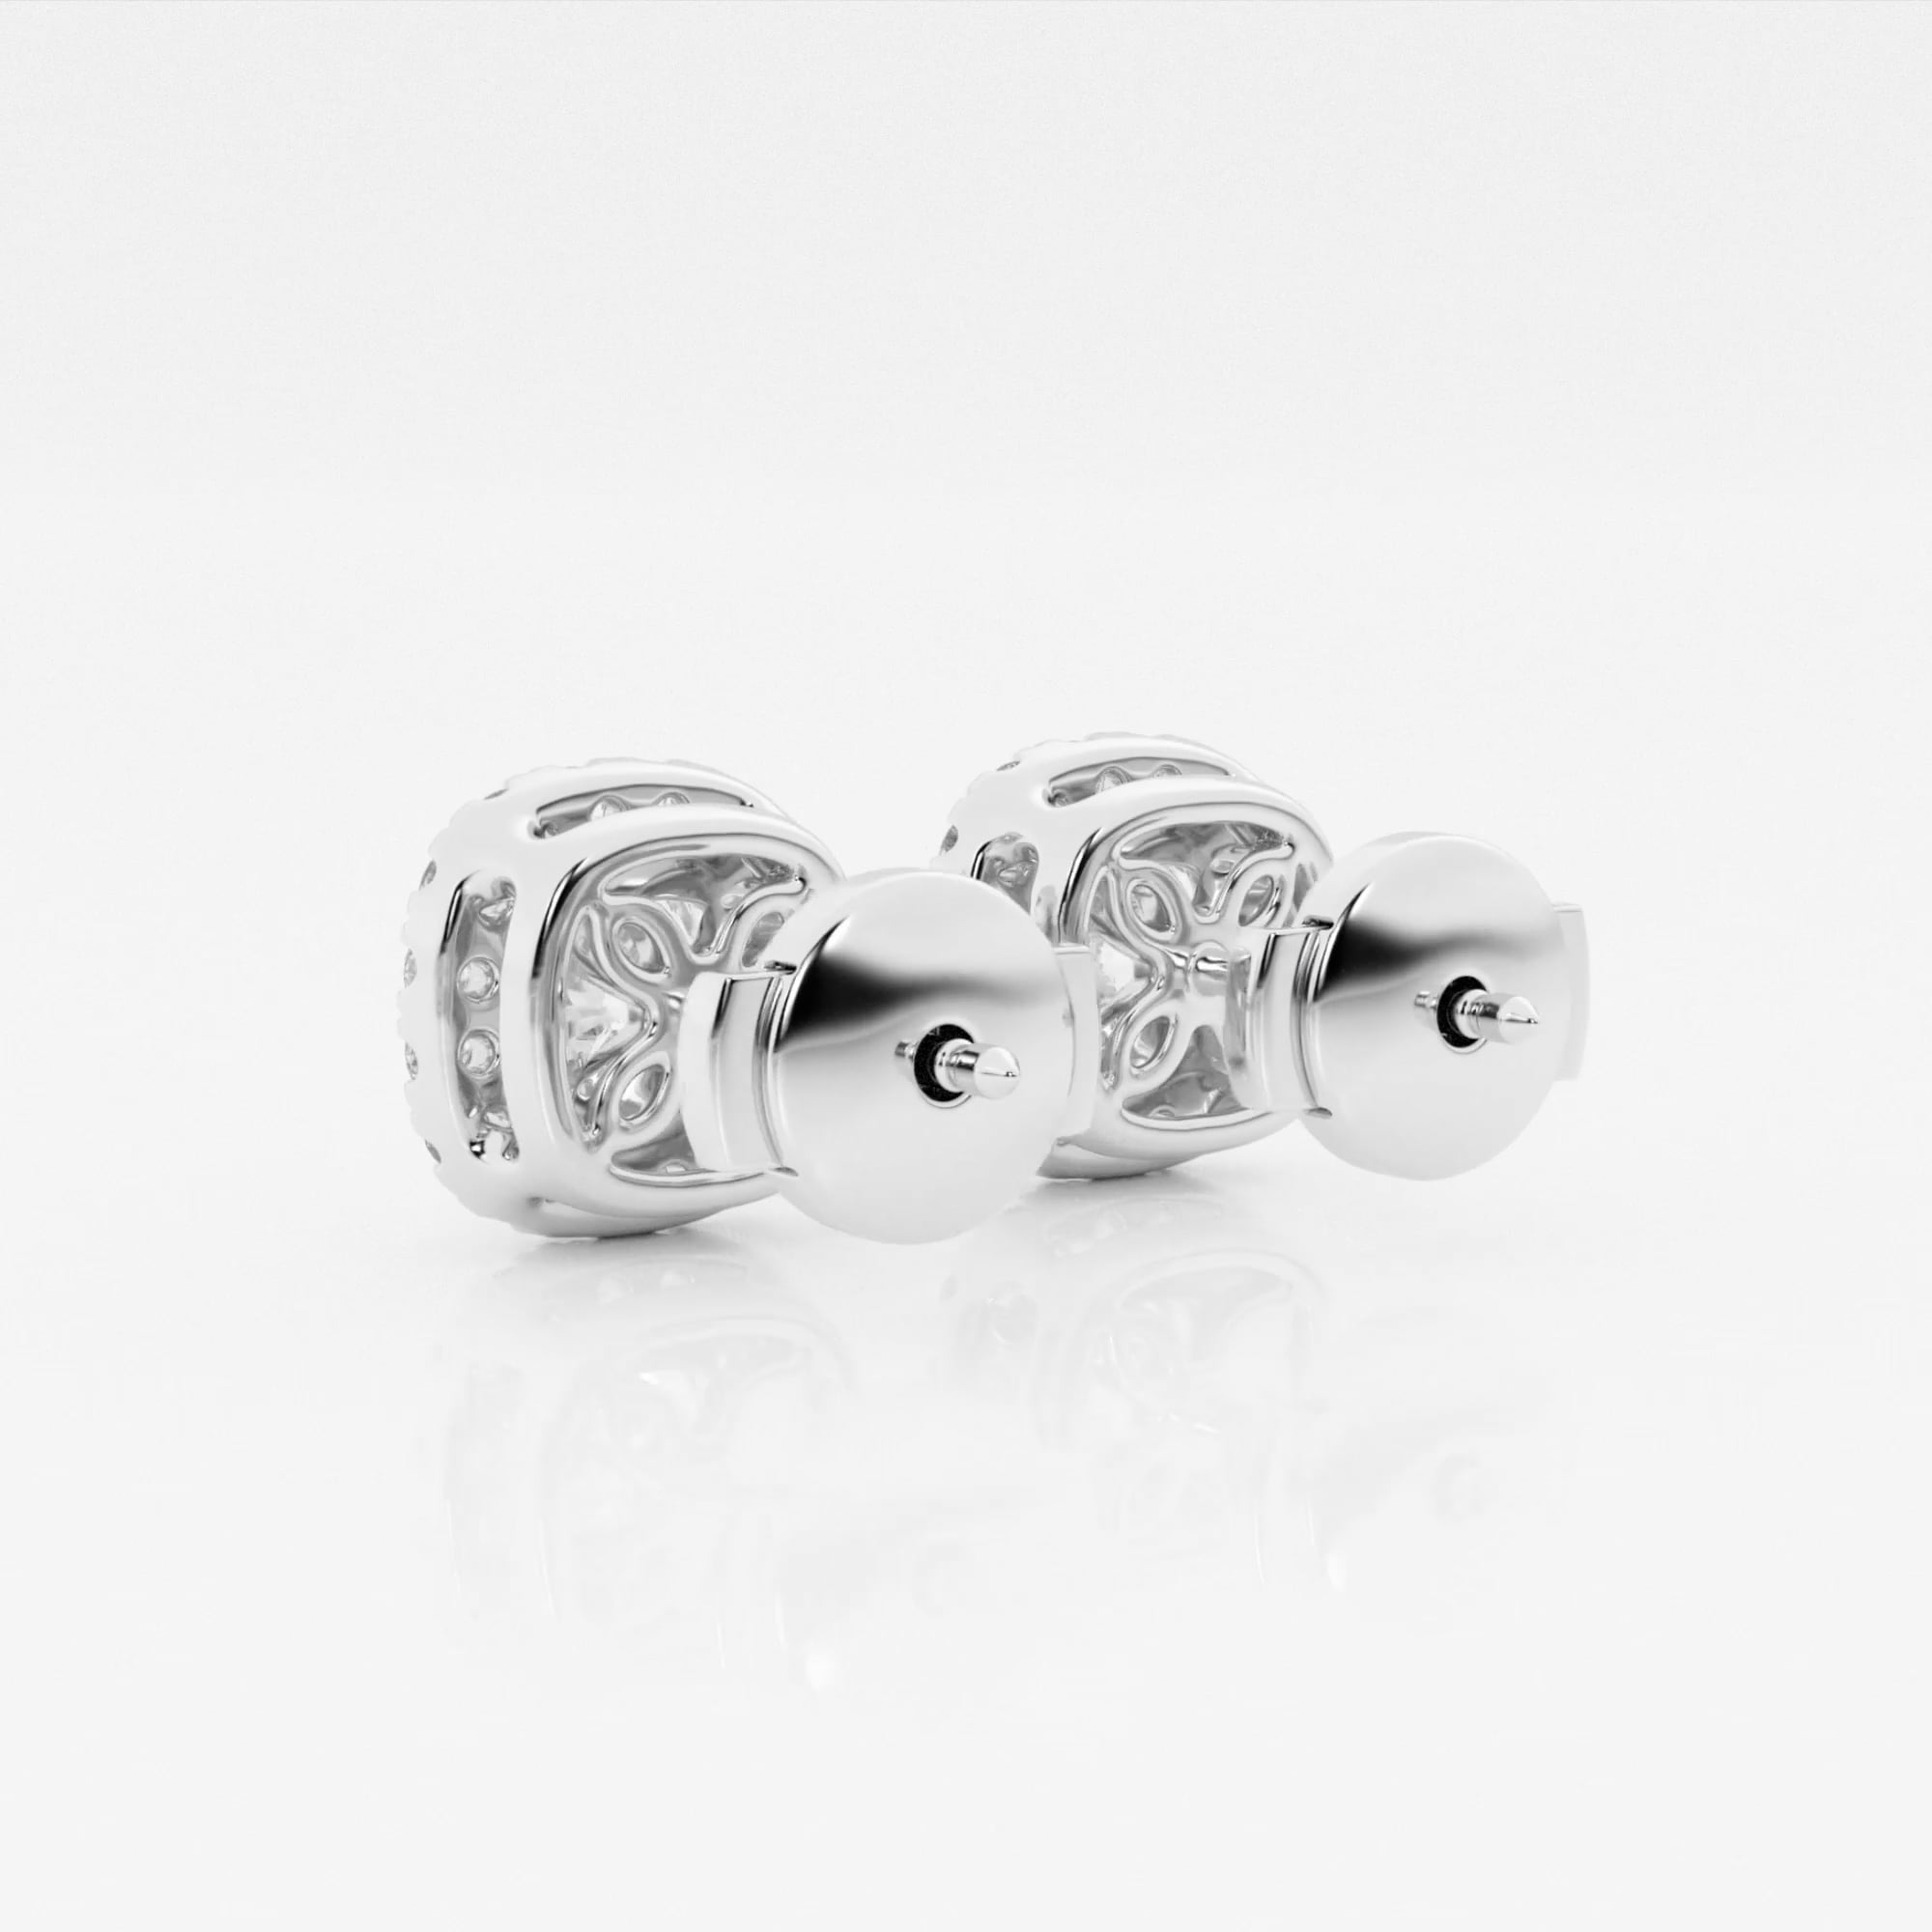 product video for 1 3/4 ctw Cushion Lab Grown Diamond Halo Certified Stud Earrings